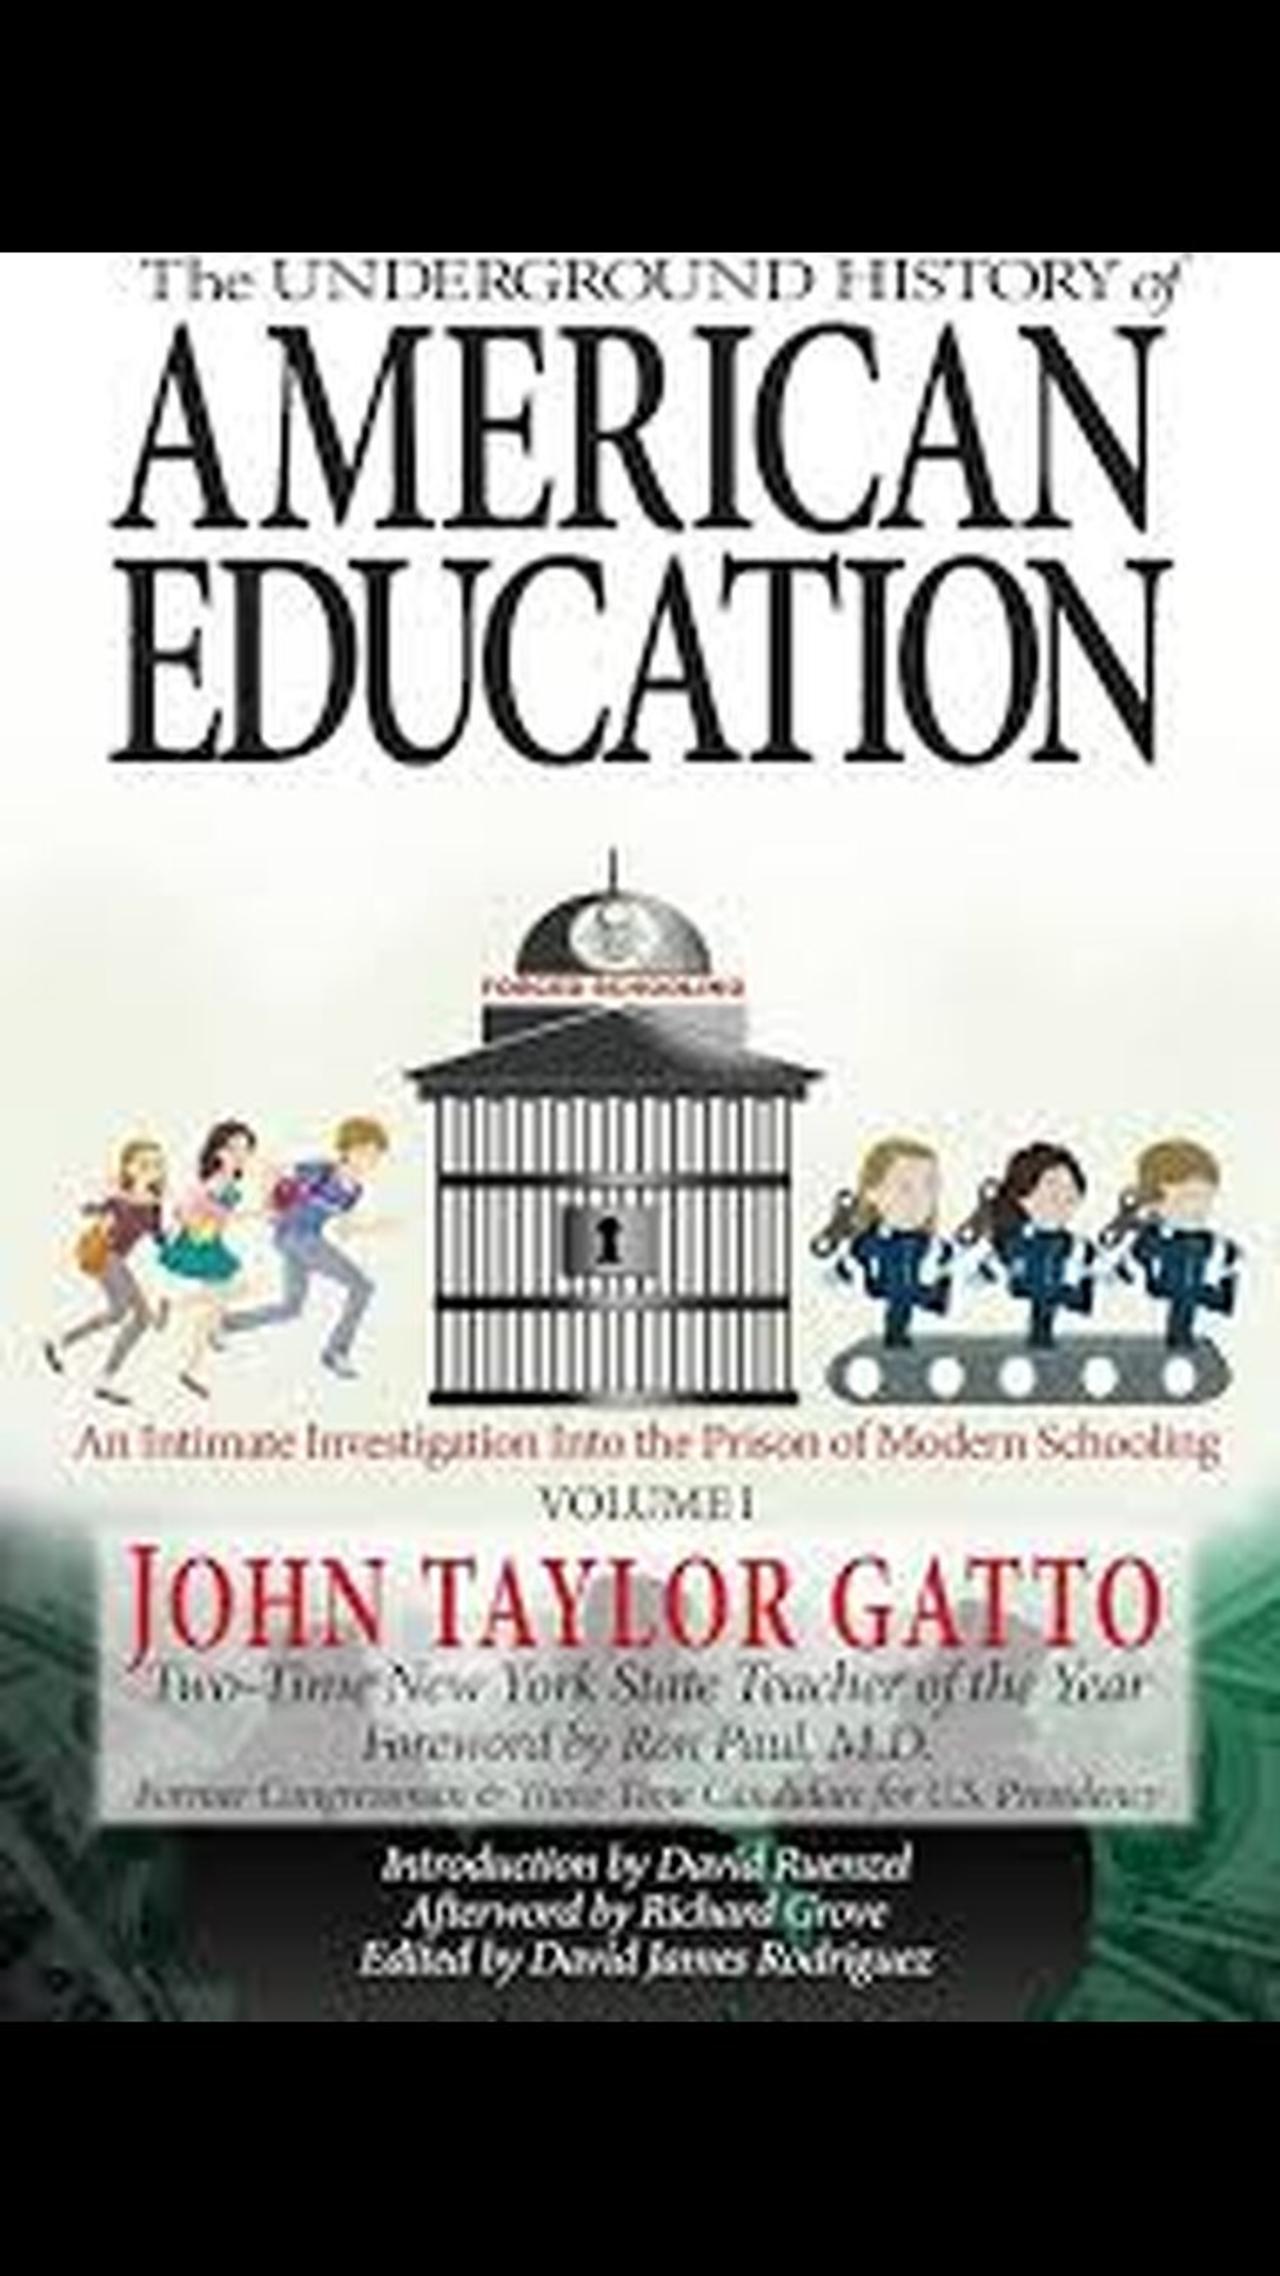 Ch. 2 "An Angry Look at Modern Schooling" by John Taylor Gatto